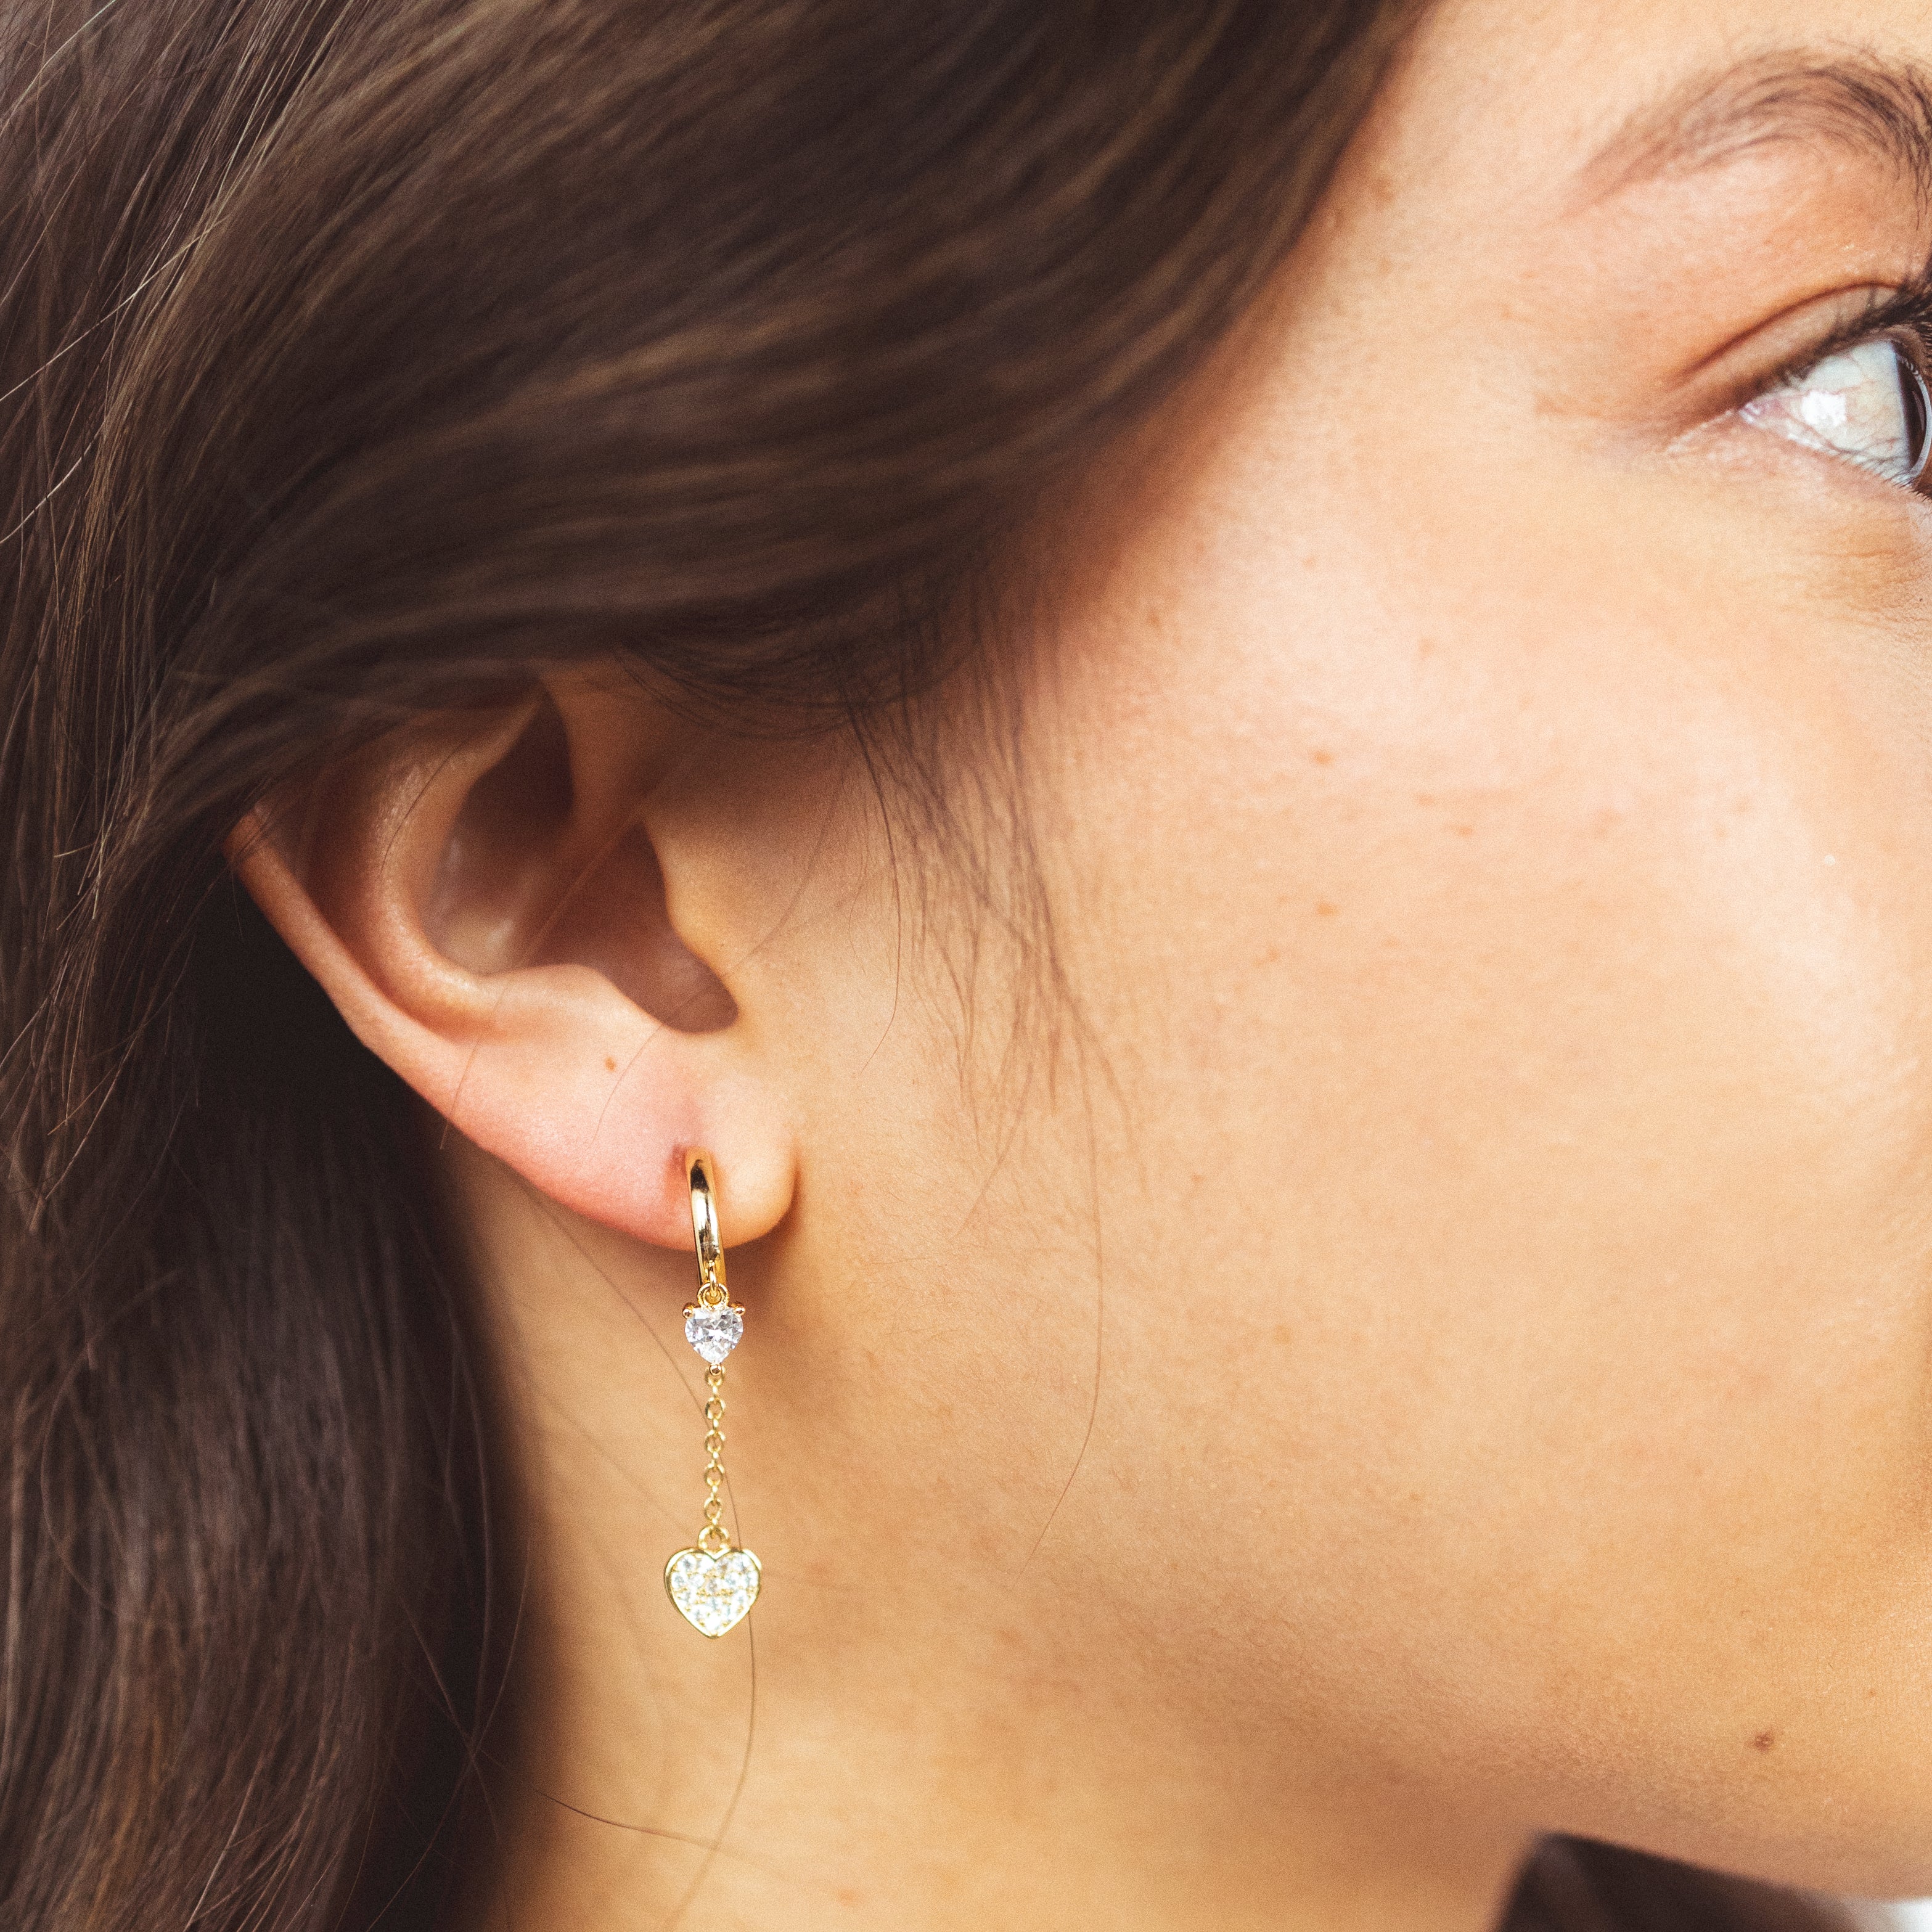 A model wearing the Aurora Clip on Earrings offer versatility with a Mosquito Coil Clip-On Closure that accommodates different ear types, including Thick, Sensitive, Small, Stretched, and Keloid Prone ears. Its Medium hold strength and adjustable padding provide a comfortable fit for any occasion.